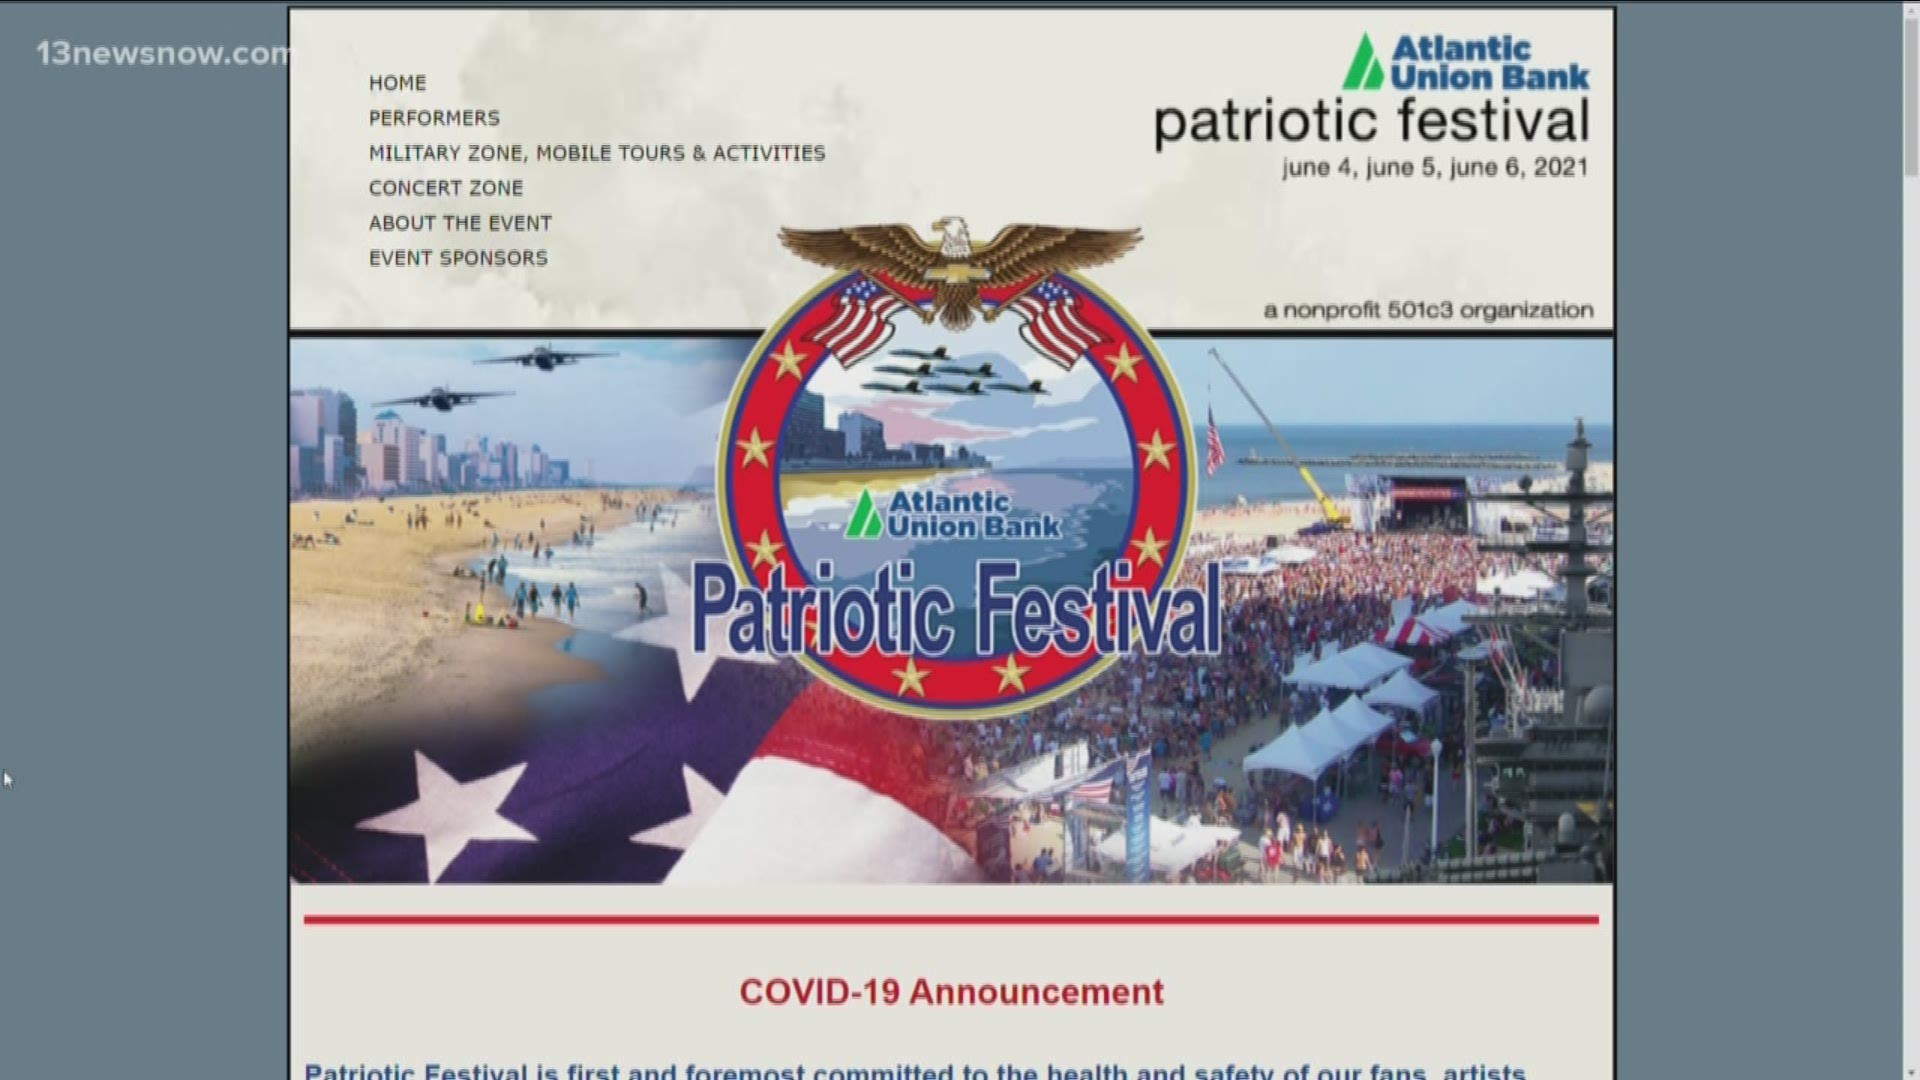 The Patriotic Fest has been canceled for summer 2020 to combat the spread of COVID-19. It's expected to continue in 2021.